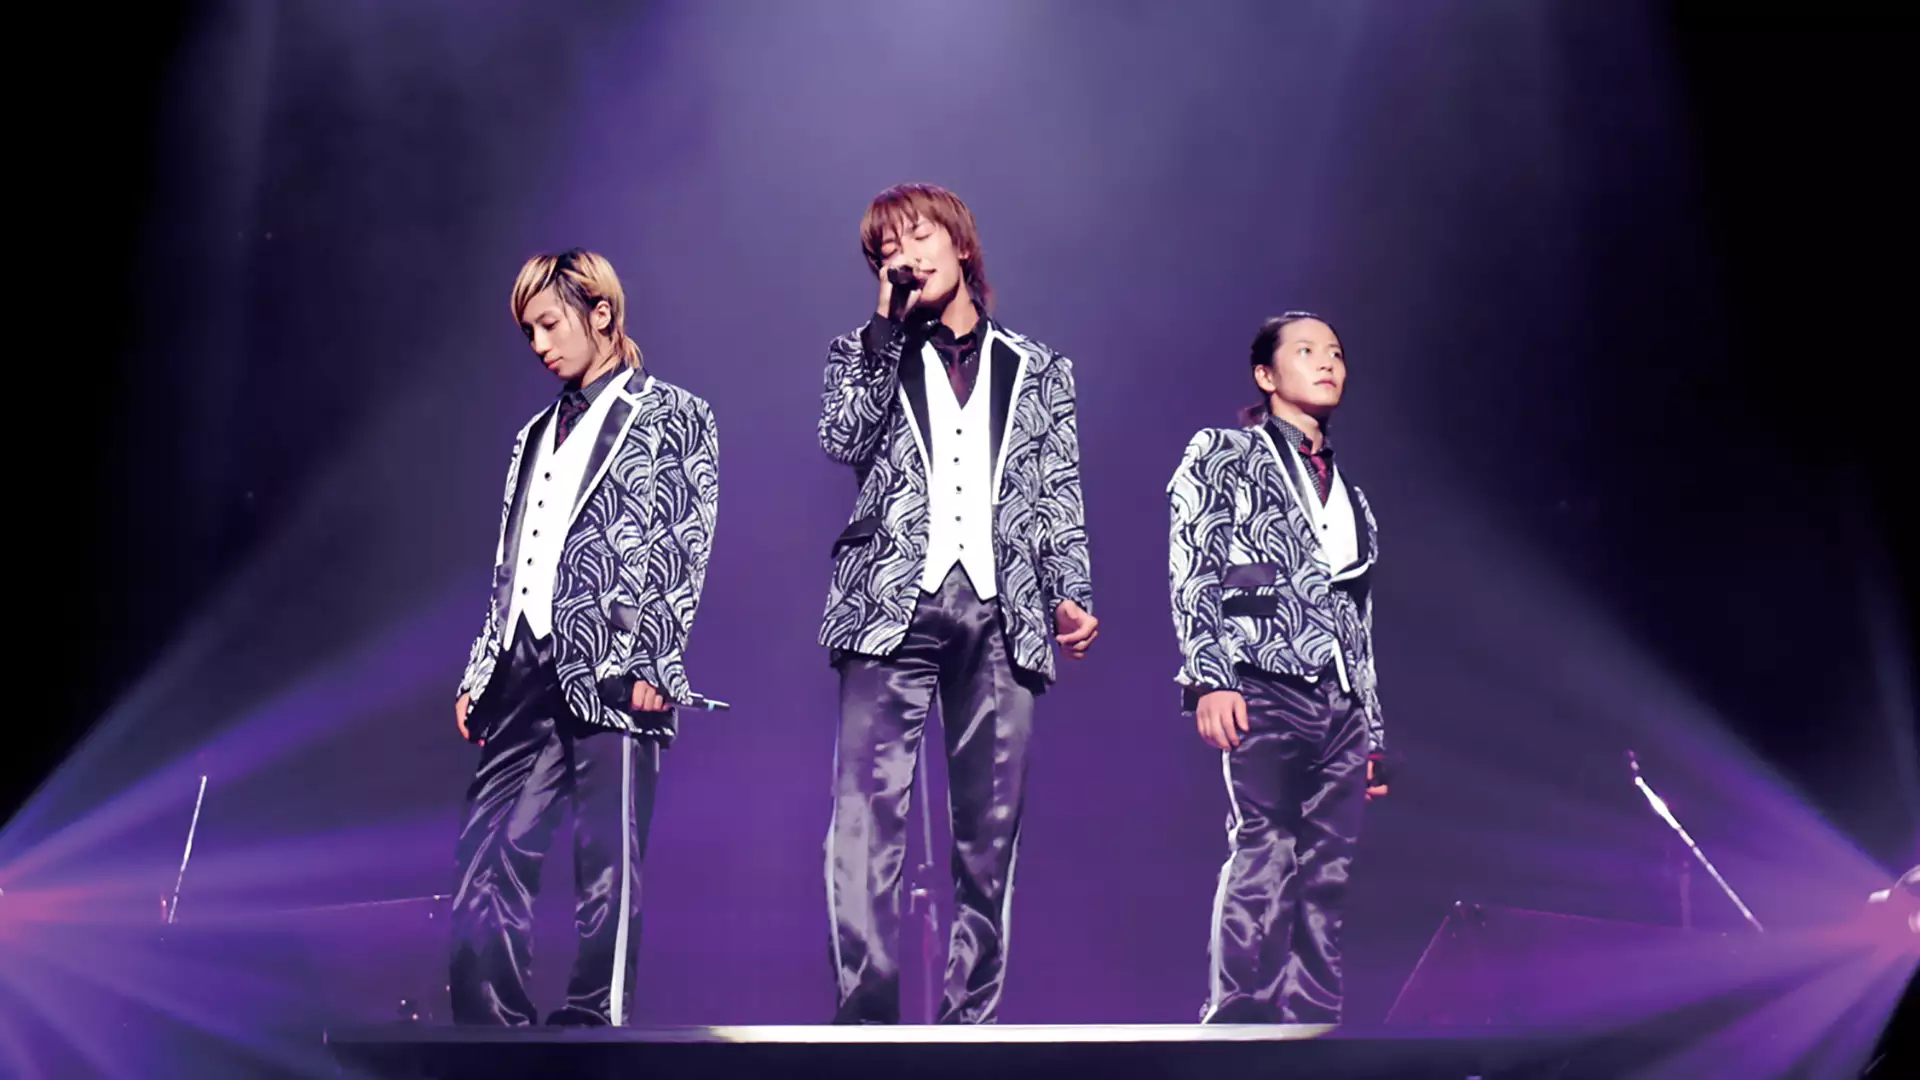 w-inds.Live Tour2006~Thanks~